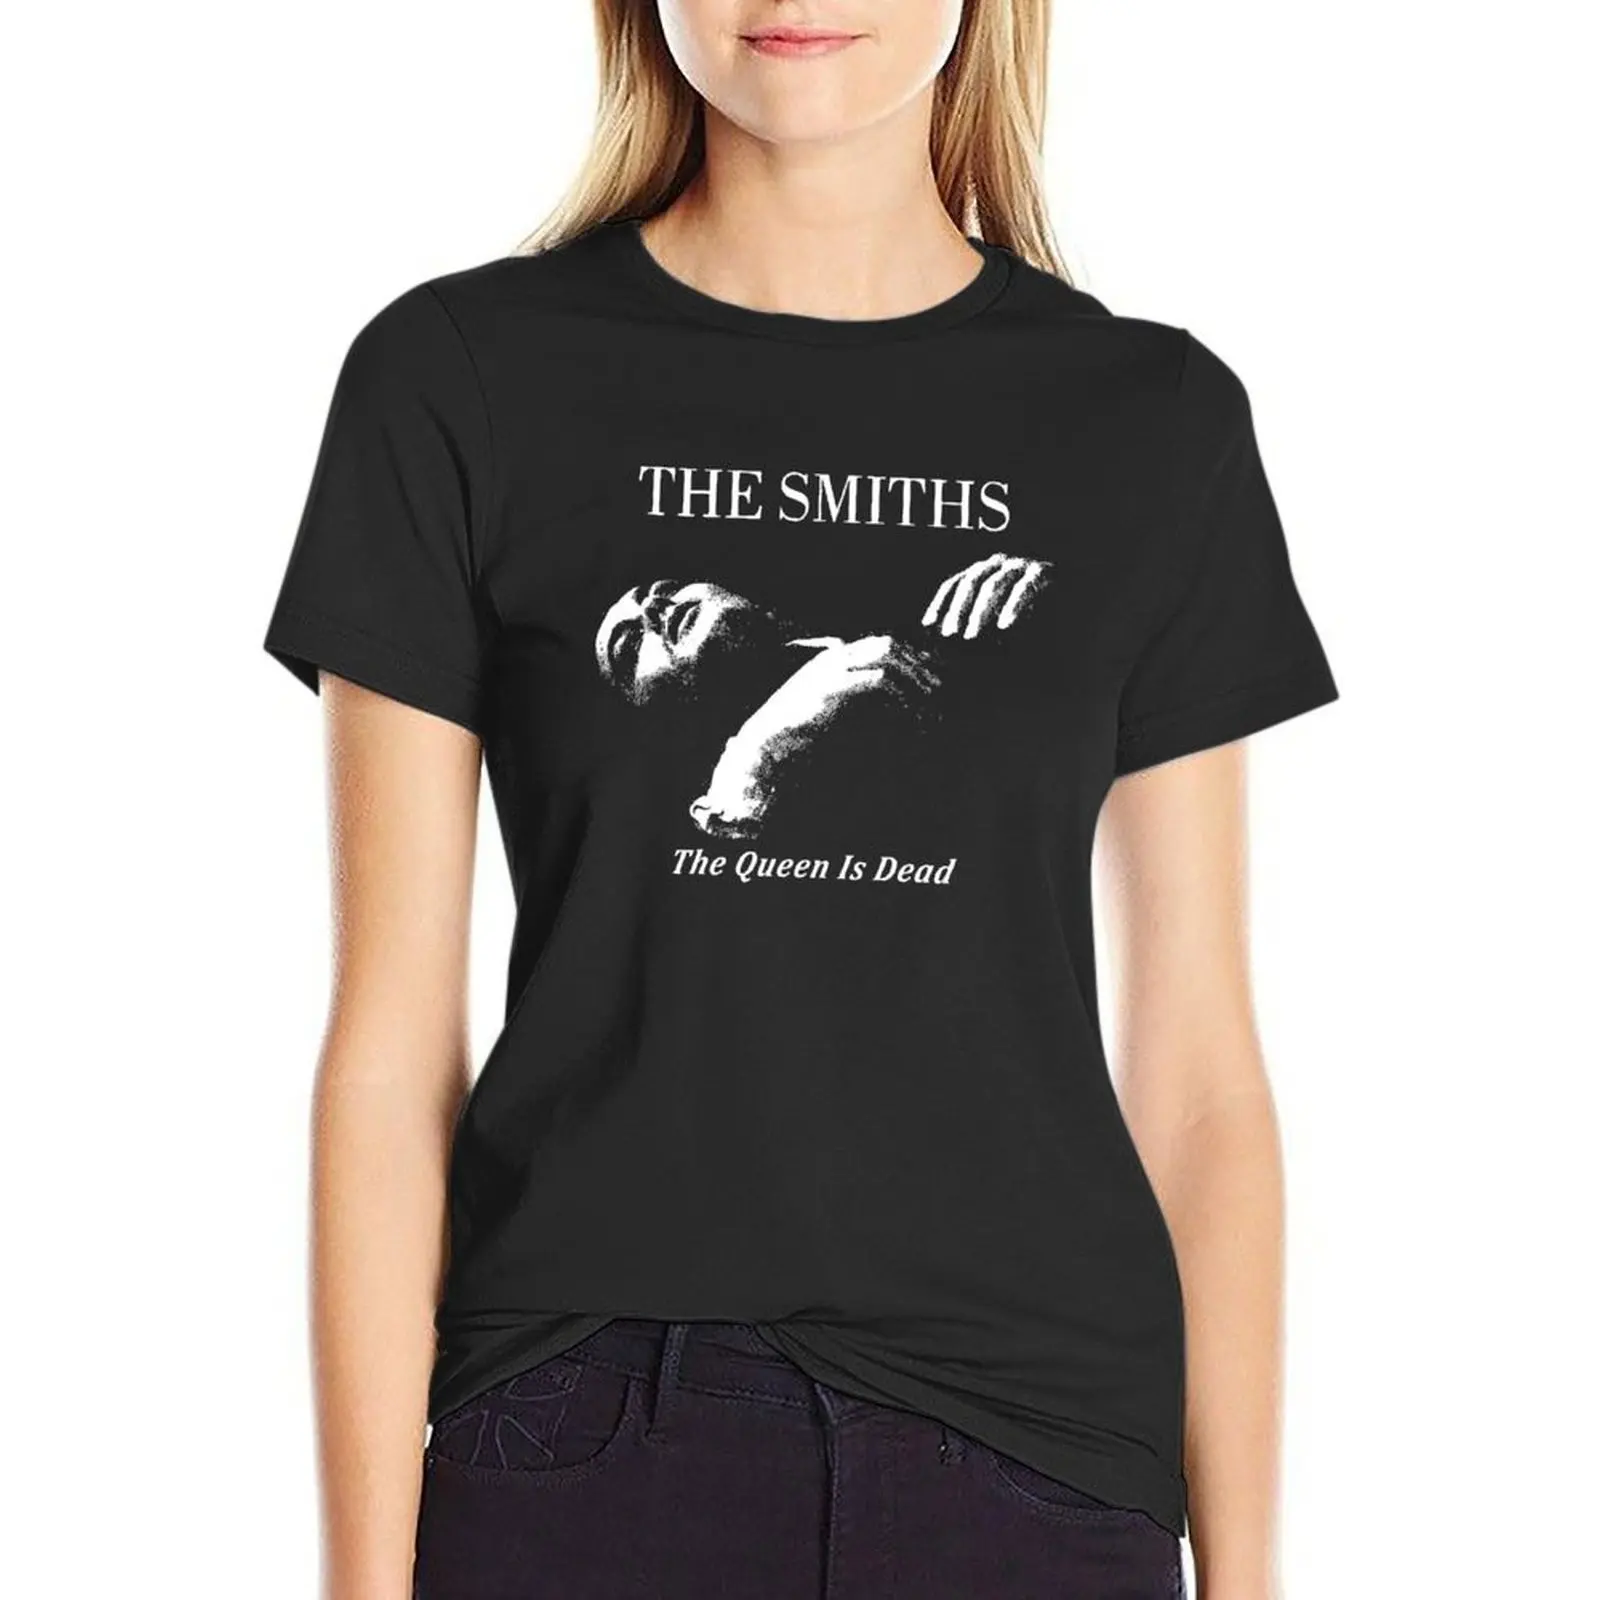 The Smiths The Queen Is Dead T-Shirt graphic t-shirts for Women t shirts for Women loose fit